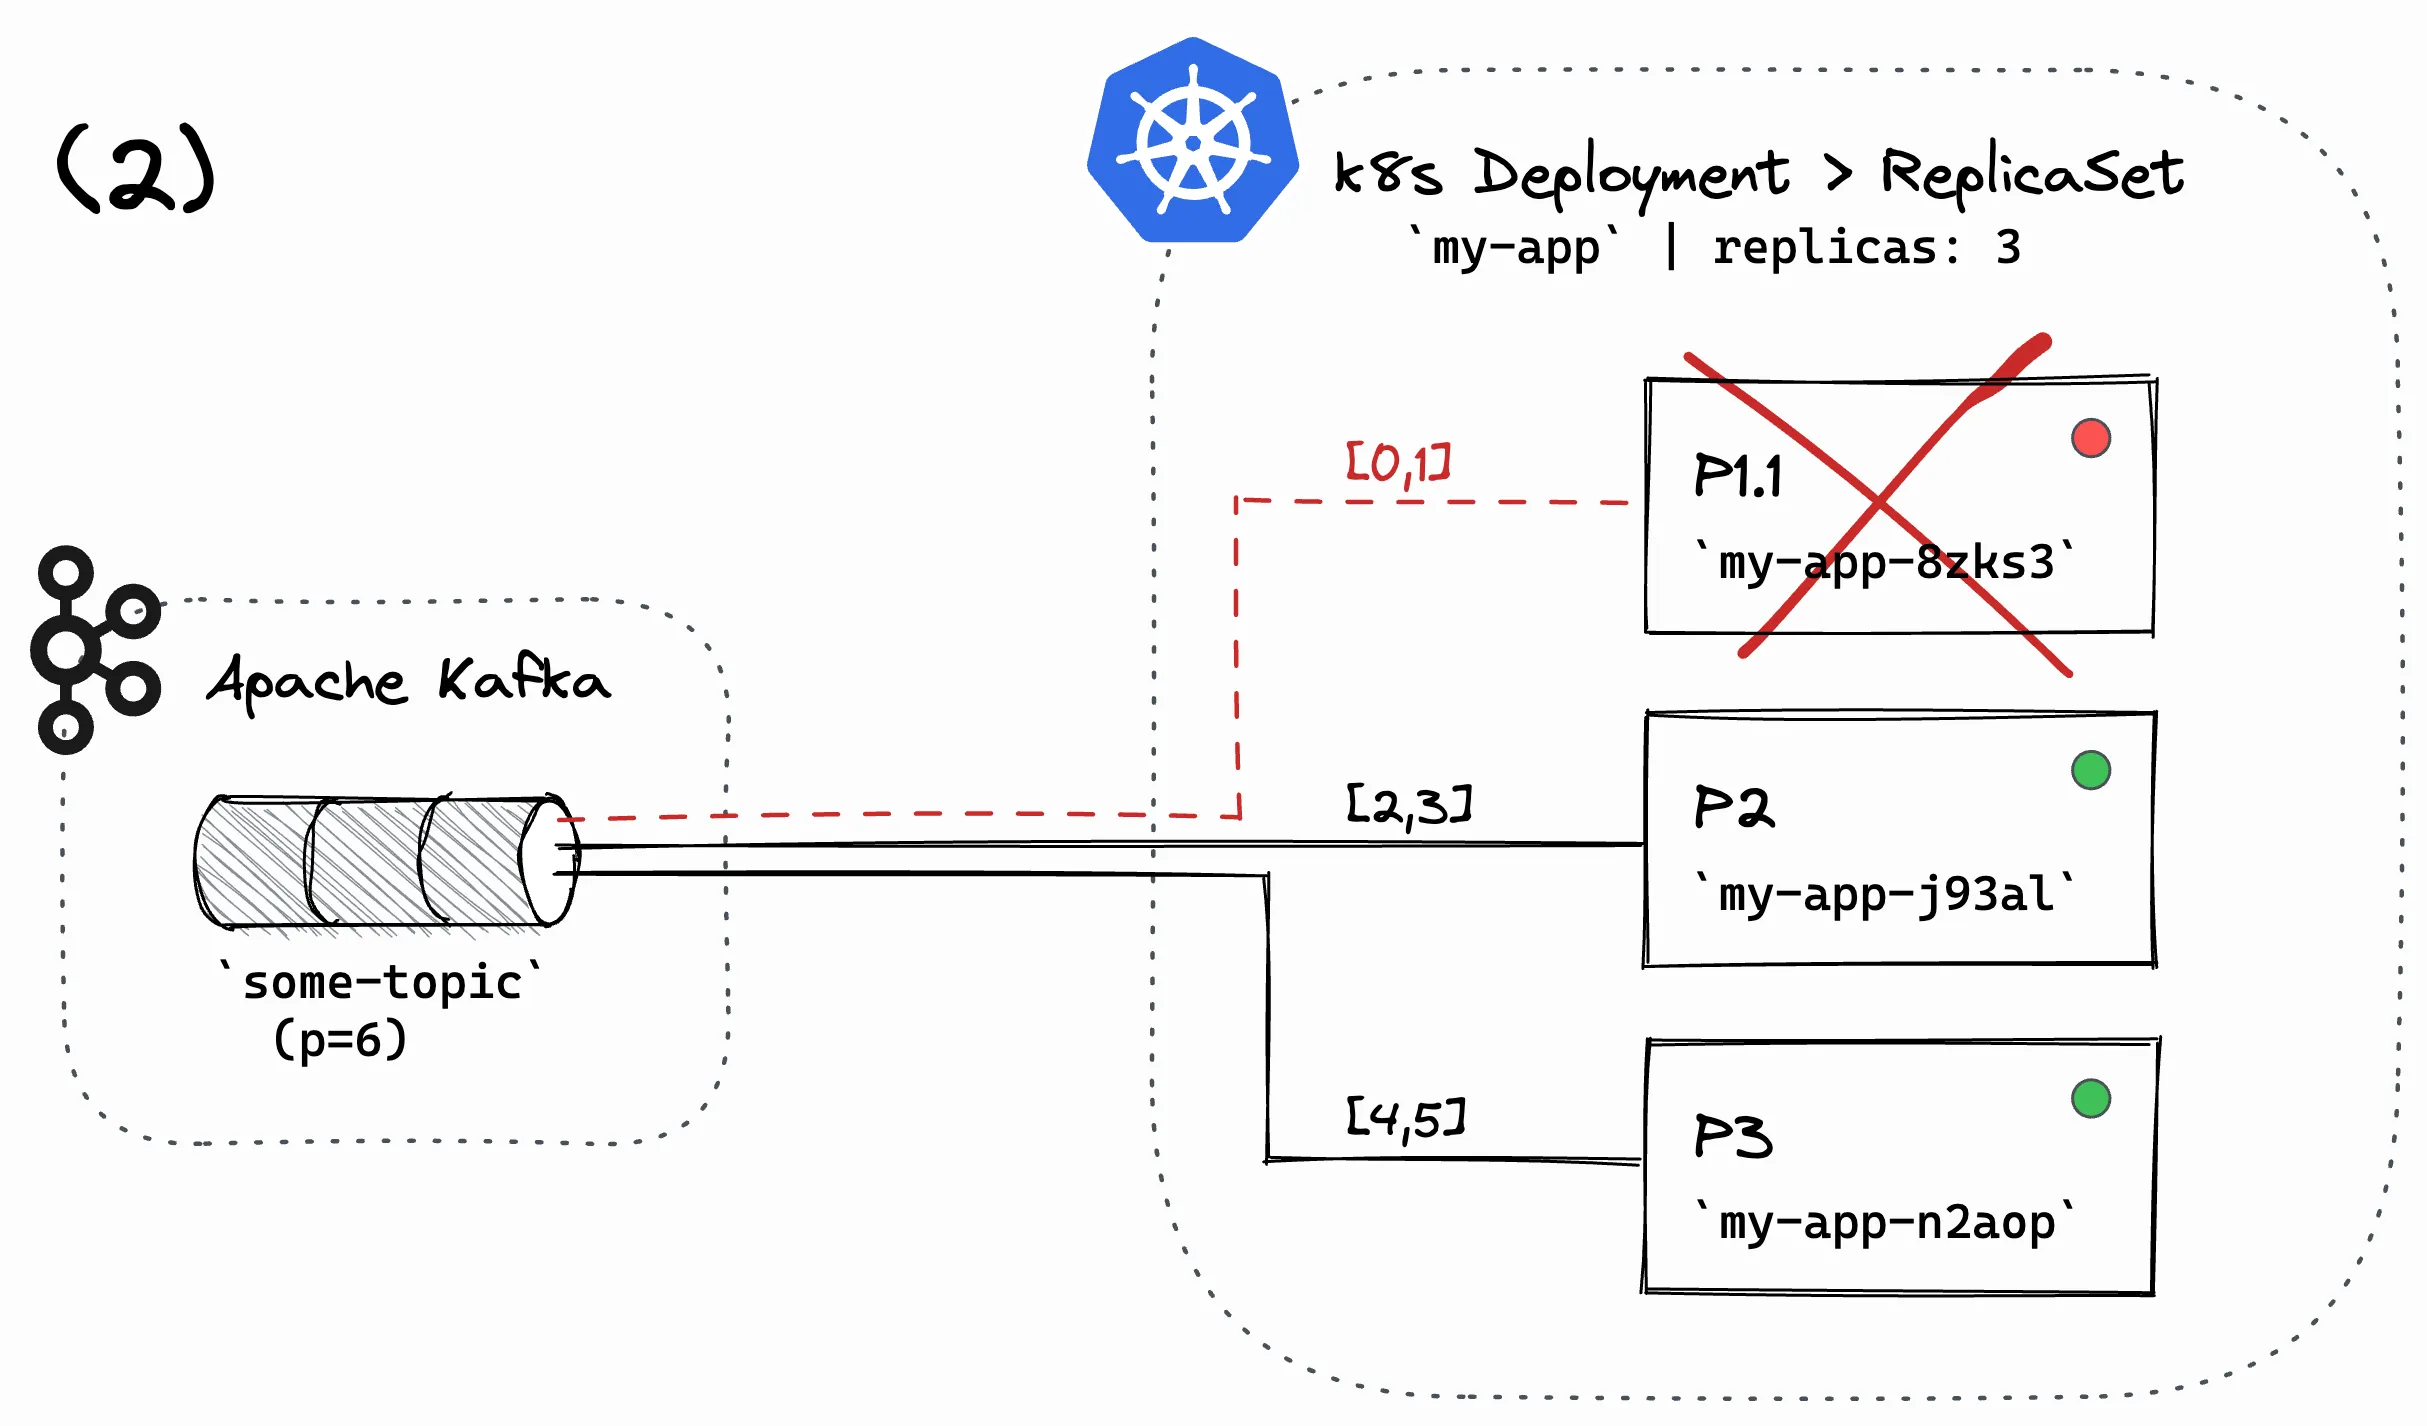 'Software Architecture' / 'Kubernetes Deployment' diagram, showing the setup of the simulation - Step 2